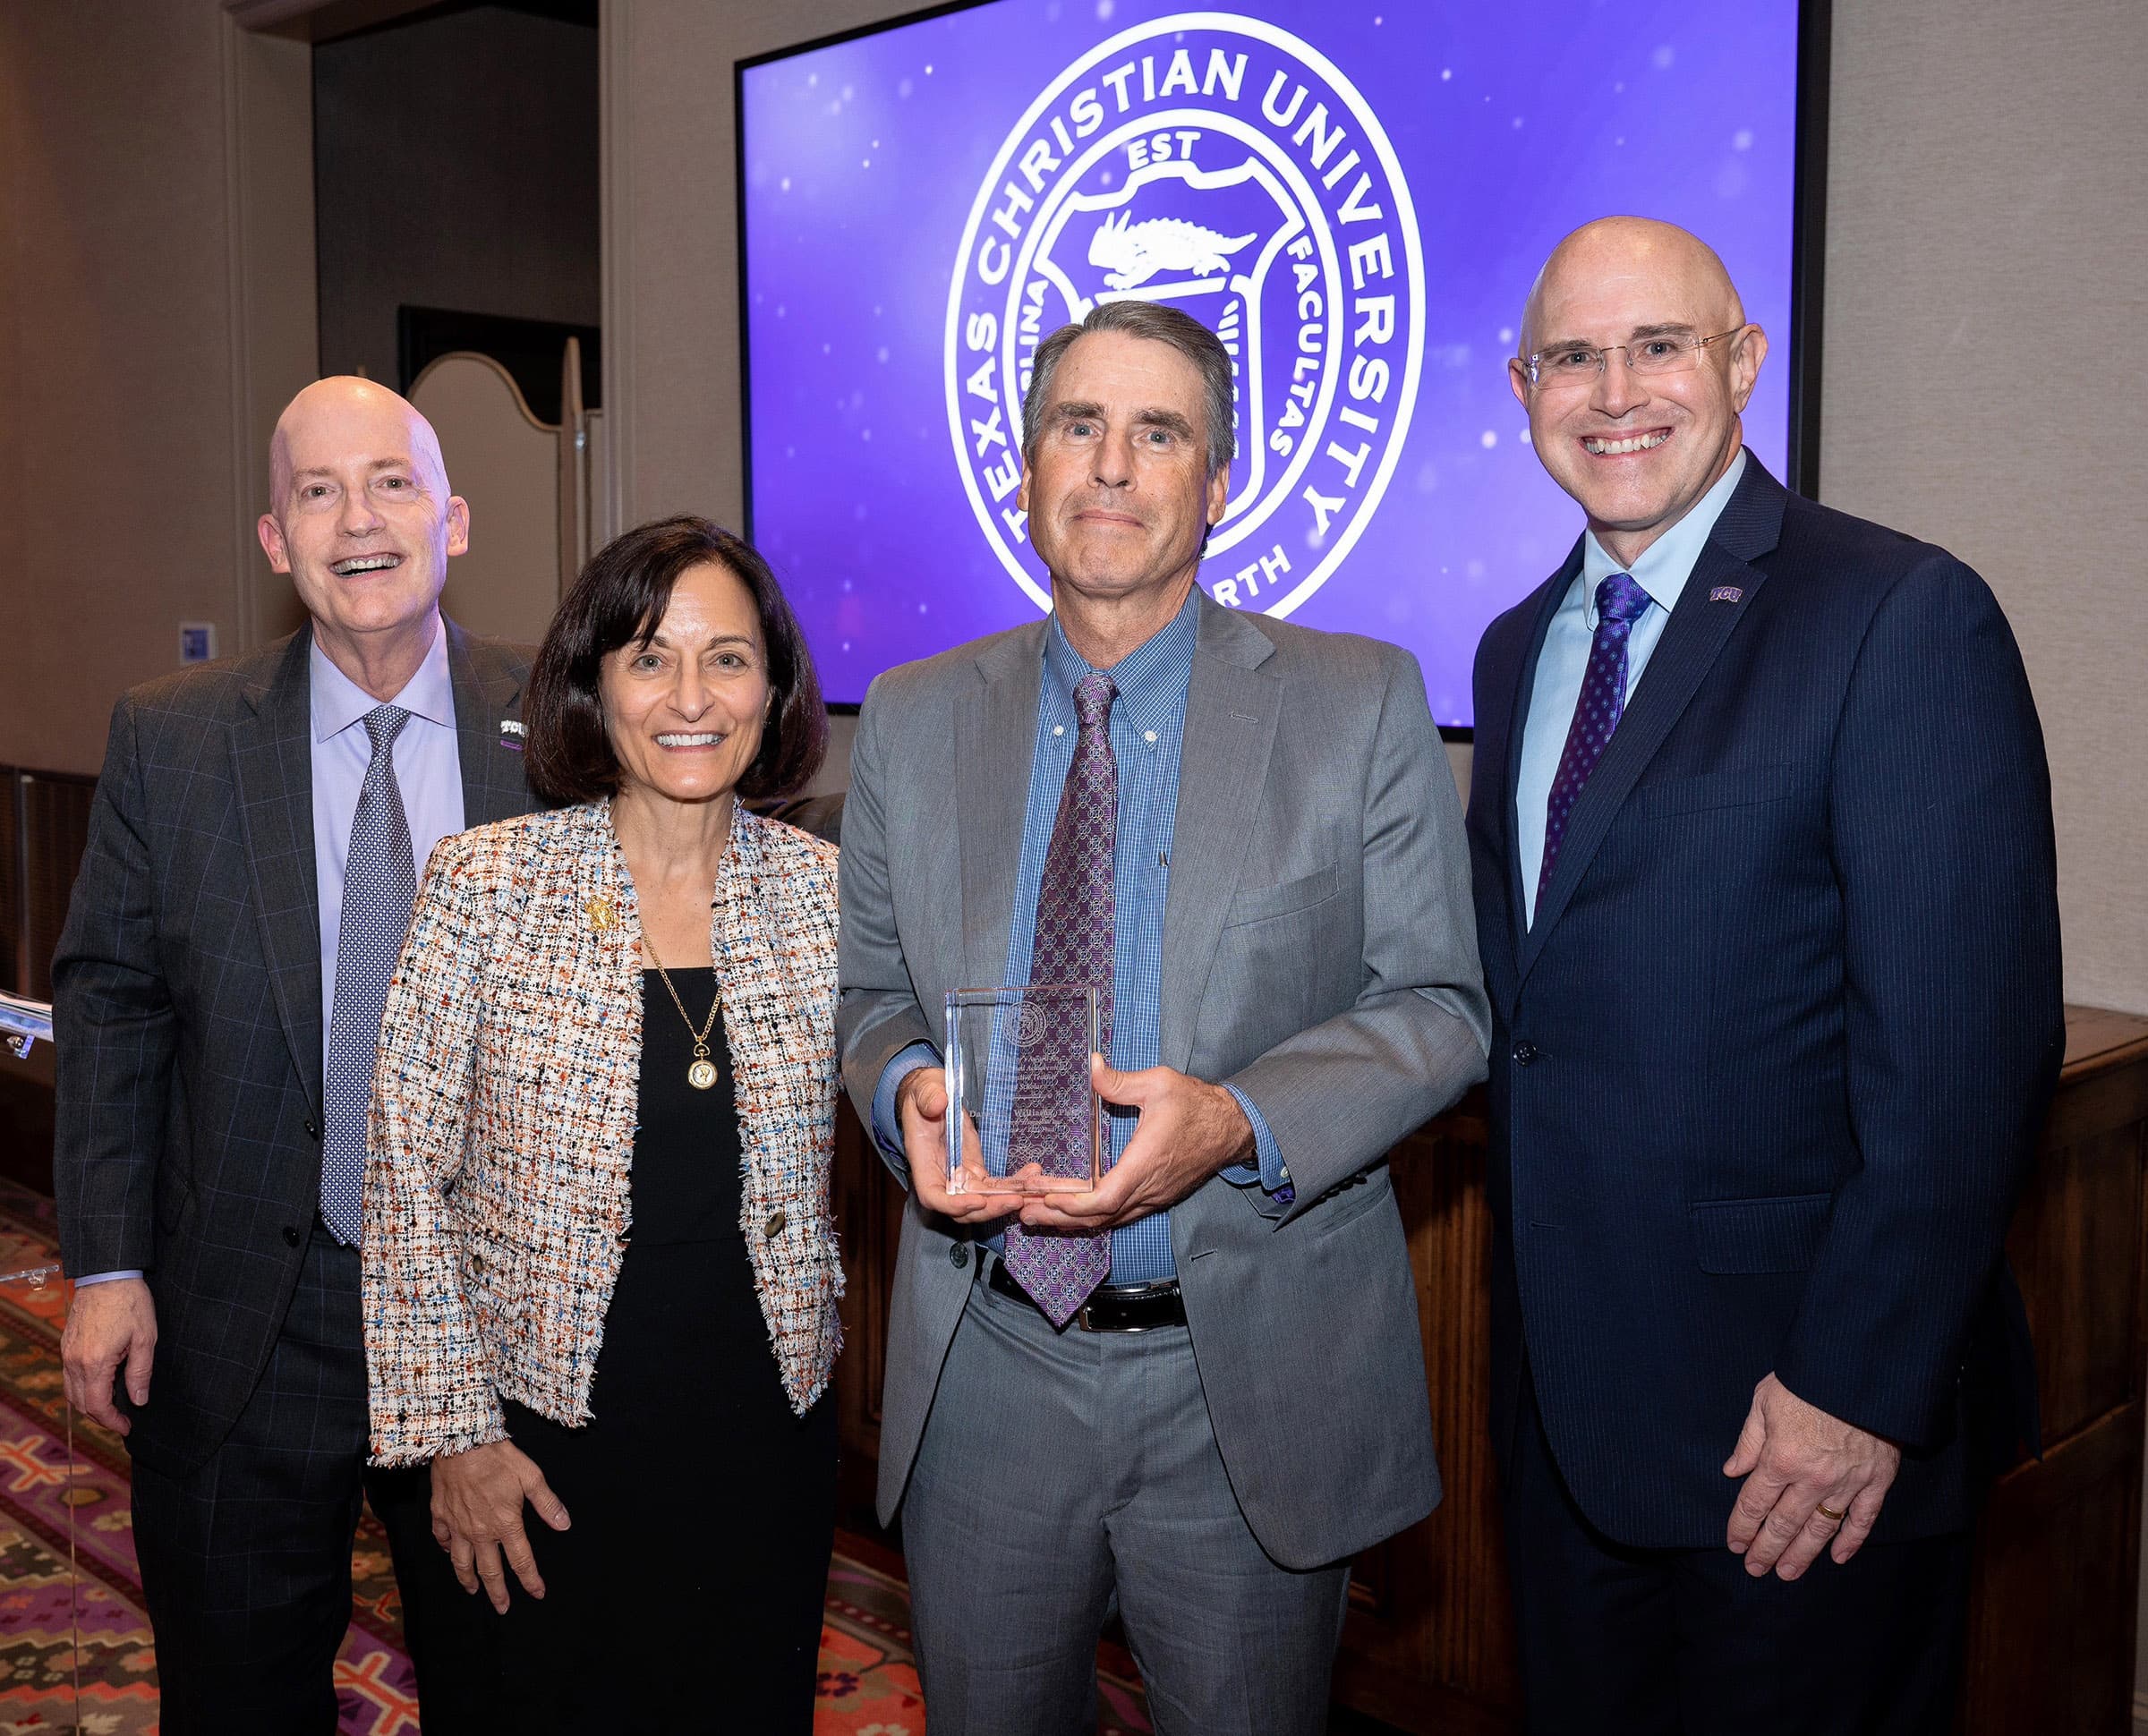 Dan Williams with Chancellor Boschini, Provost Dahlberg and Dean Pitcock accepting his award